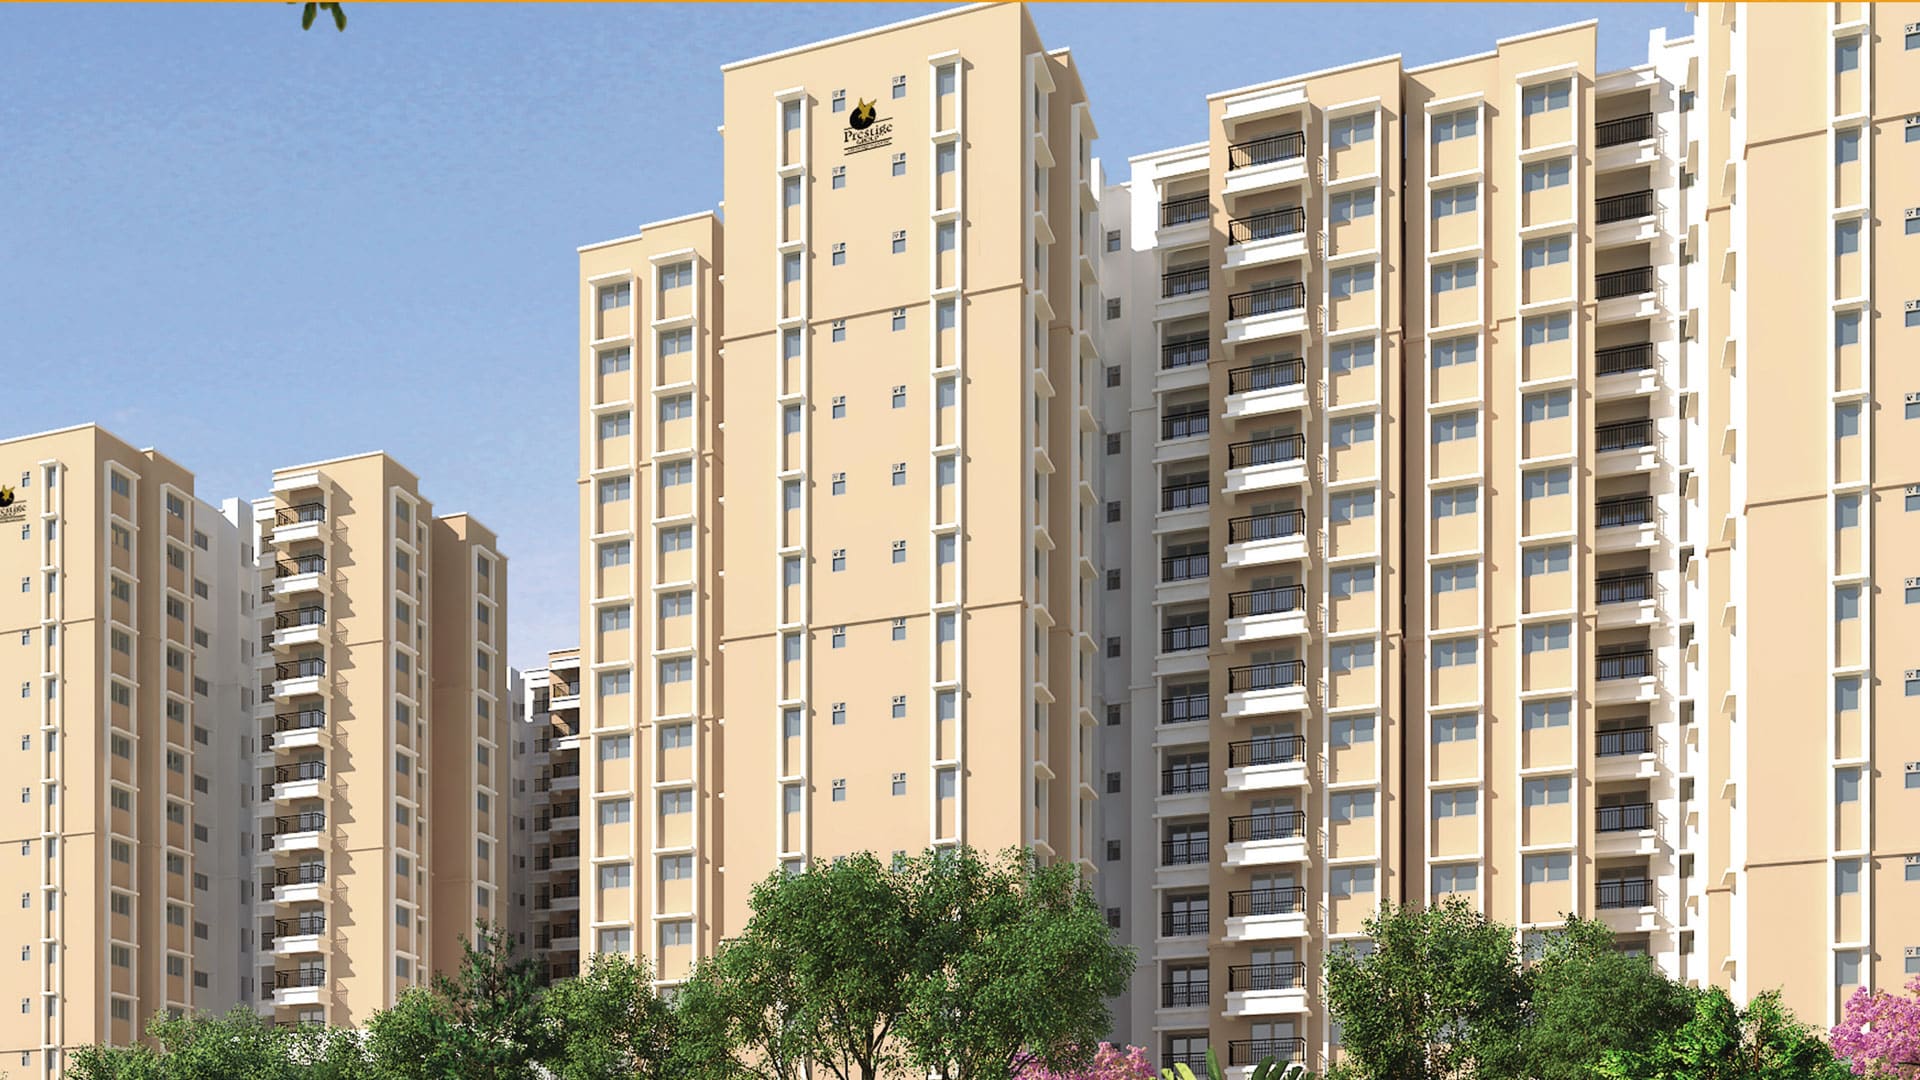 Real estate-focused investment funds by Prestige Group